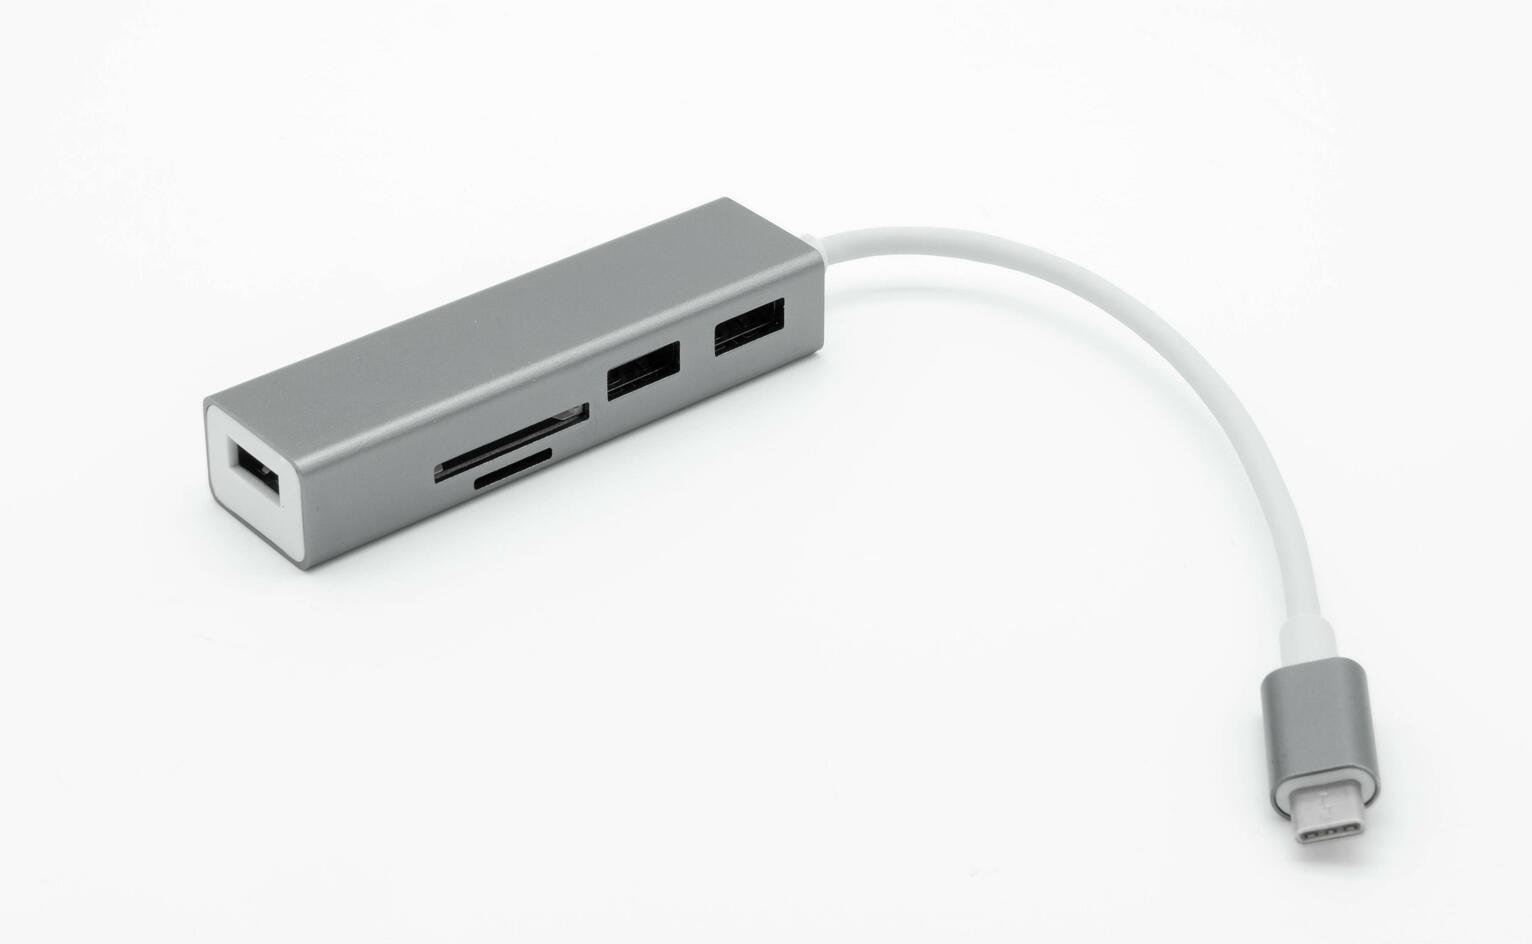 Dynamode USB-C 5 Port Hub with Card Reader Review